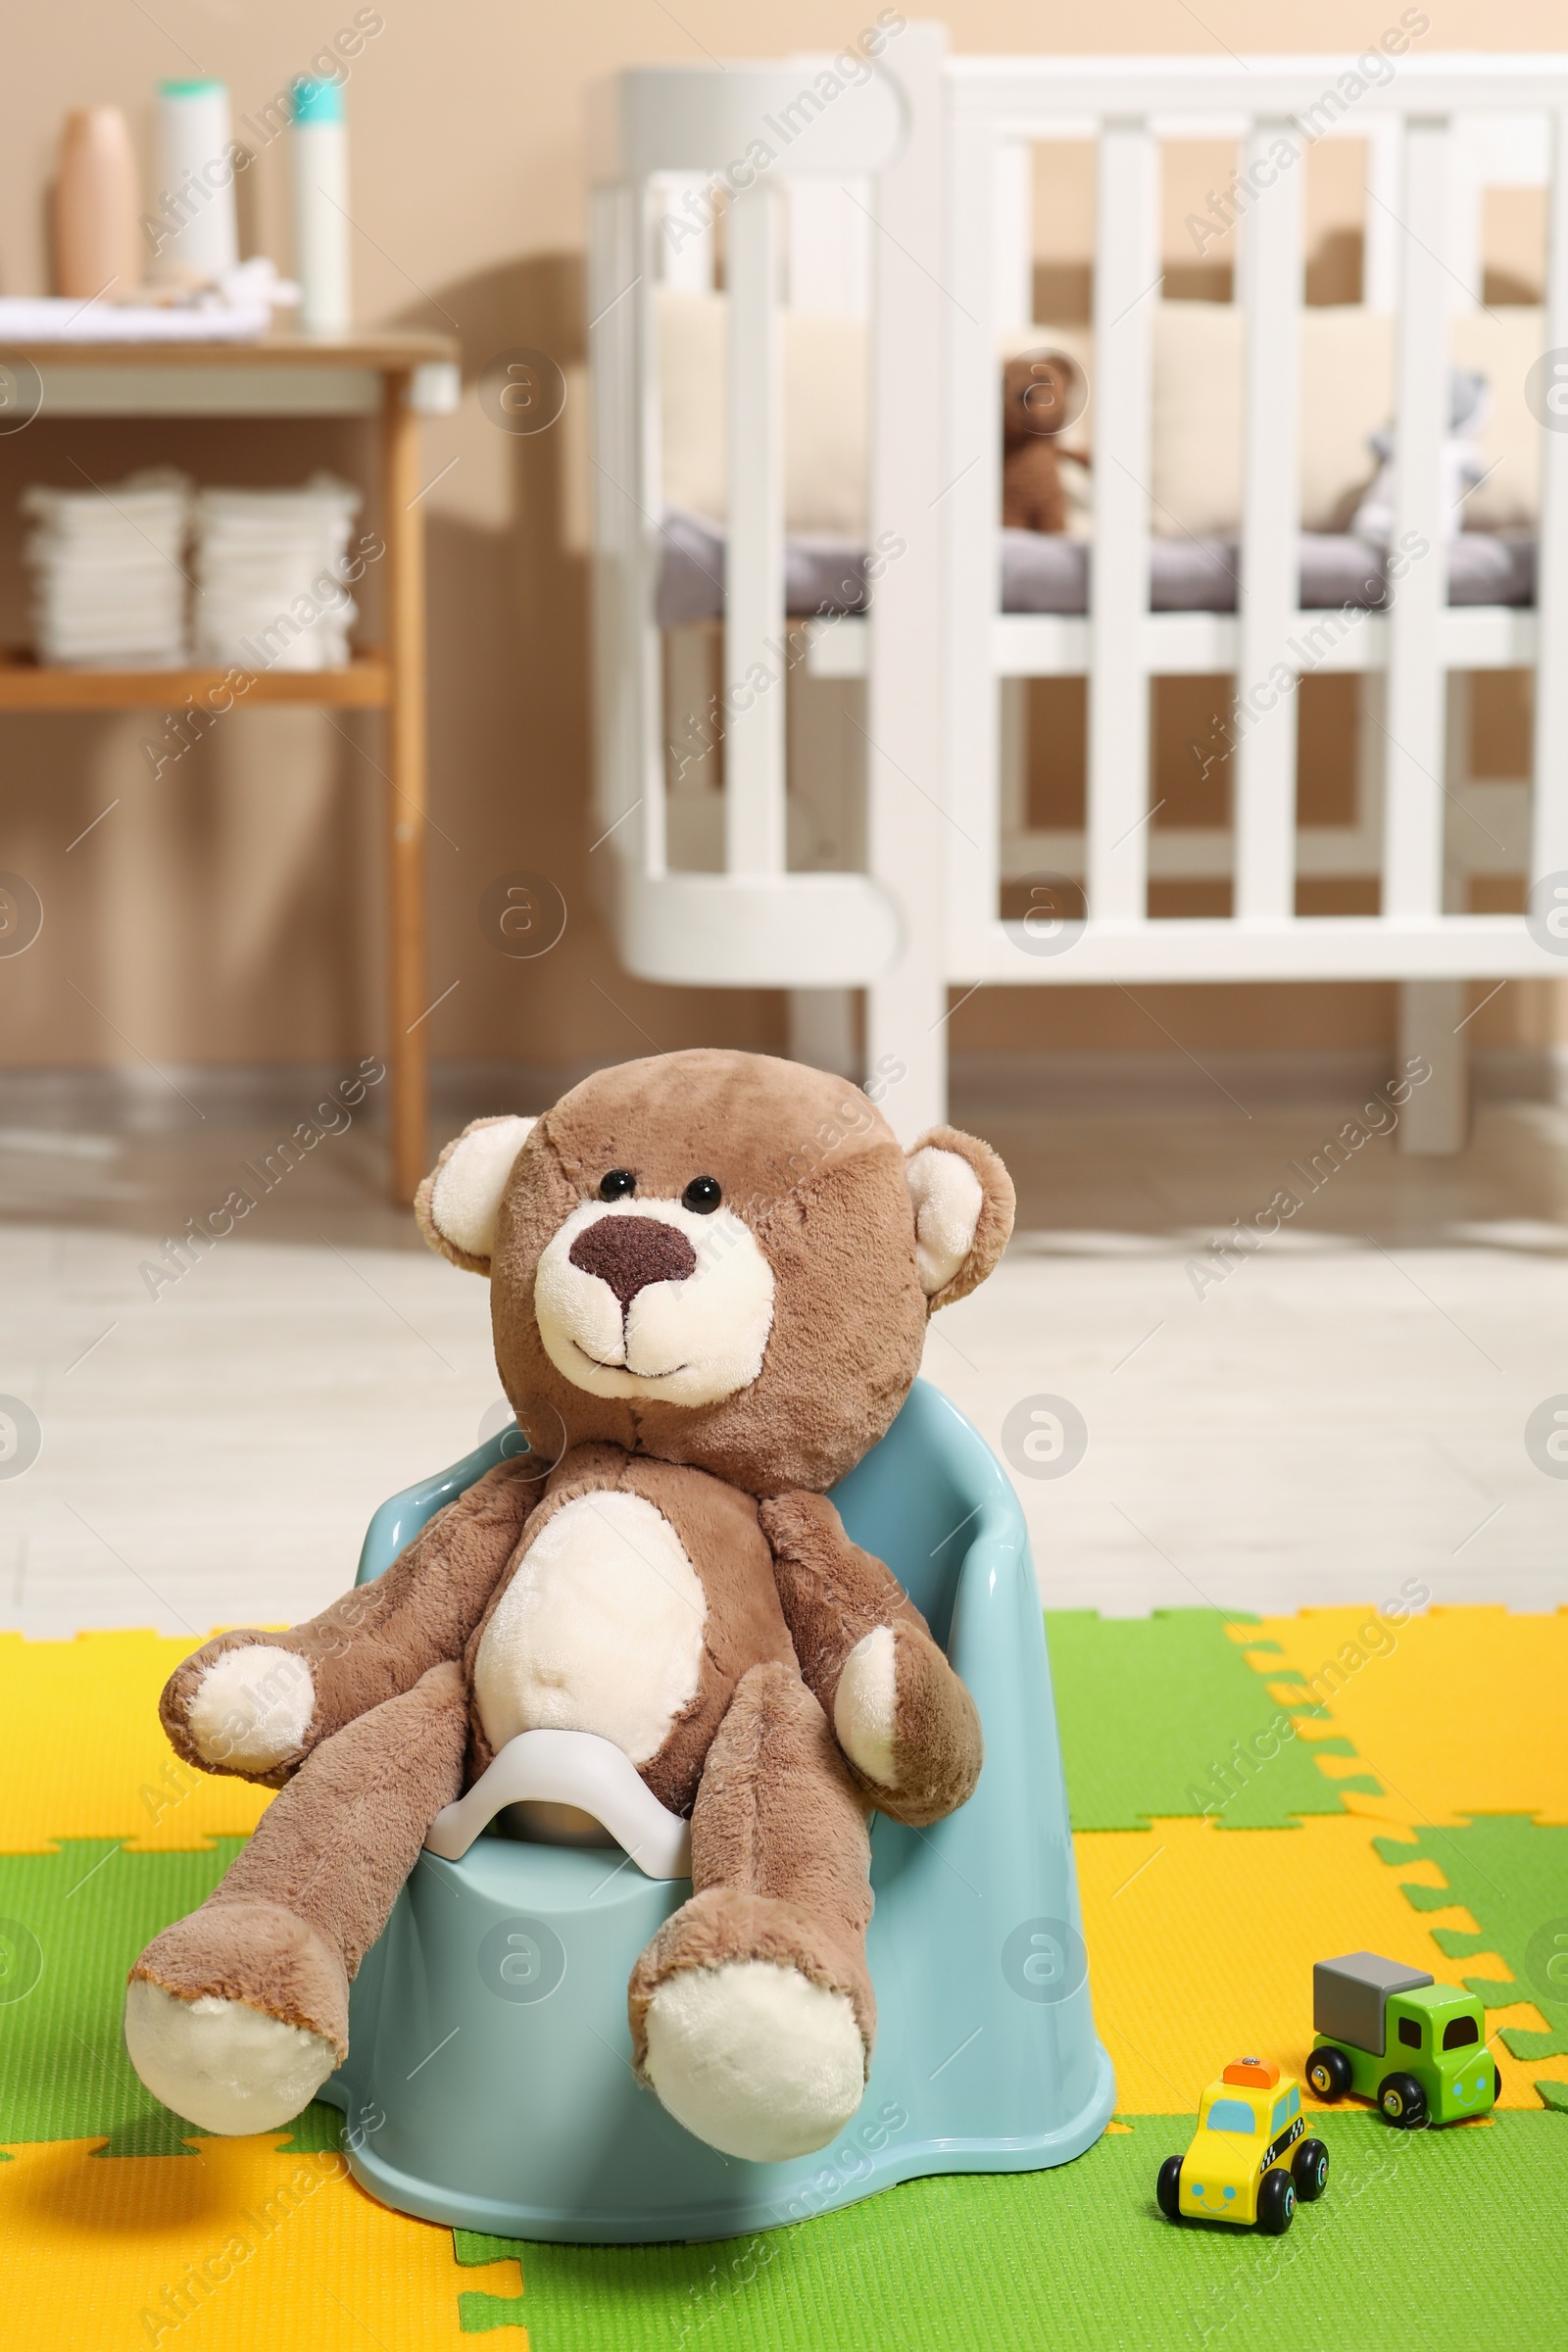 Photo of Cute teddy bear on light blue baby potty in room. Toilet training